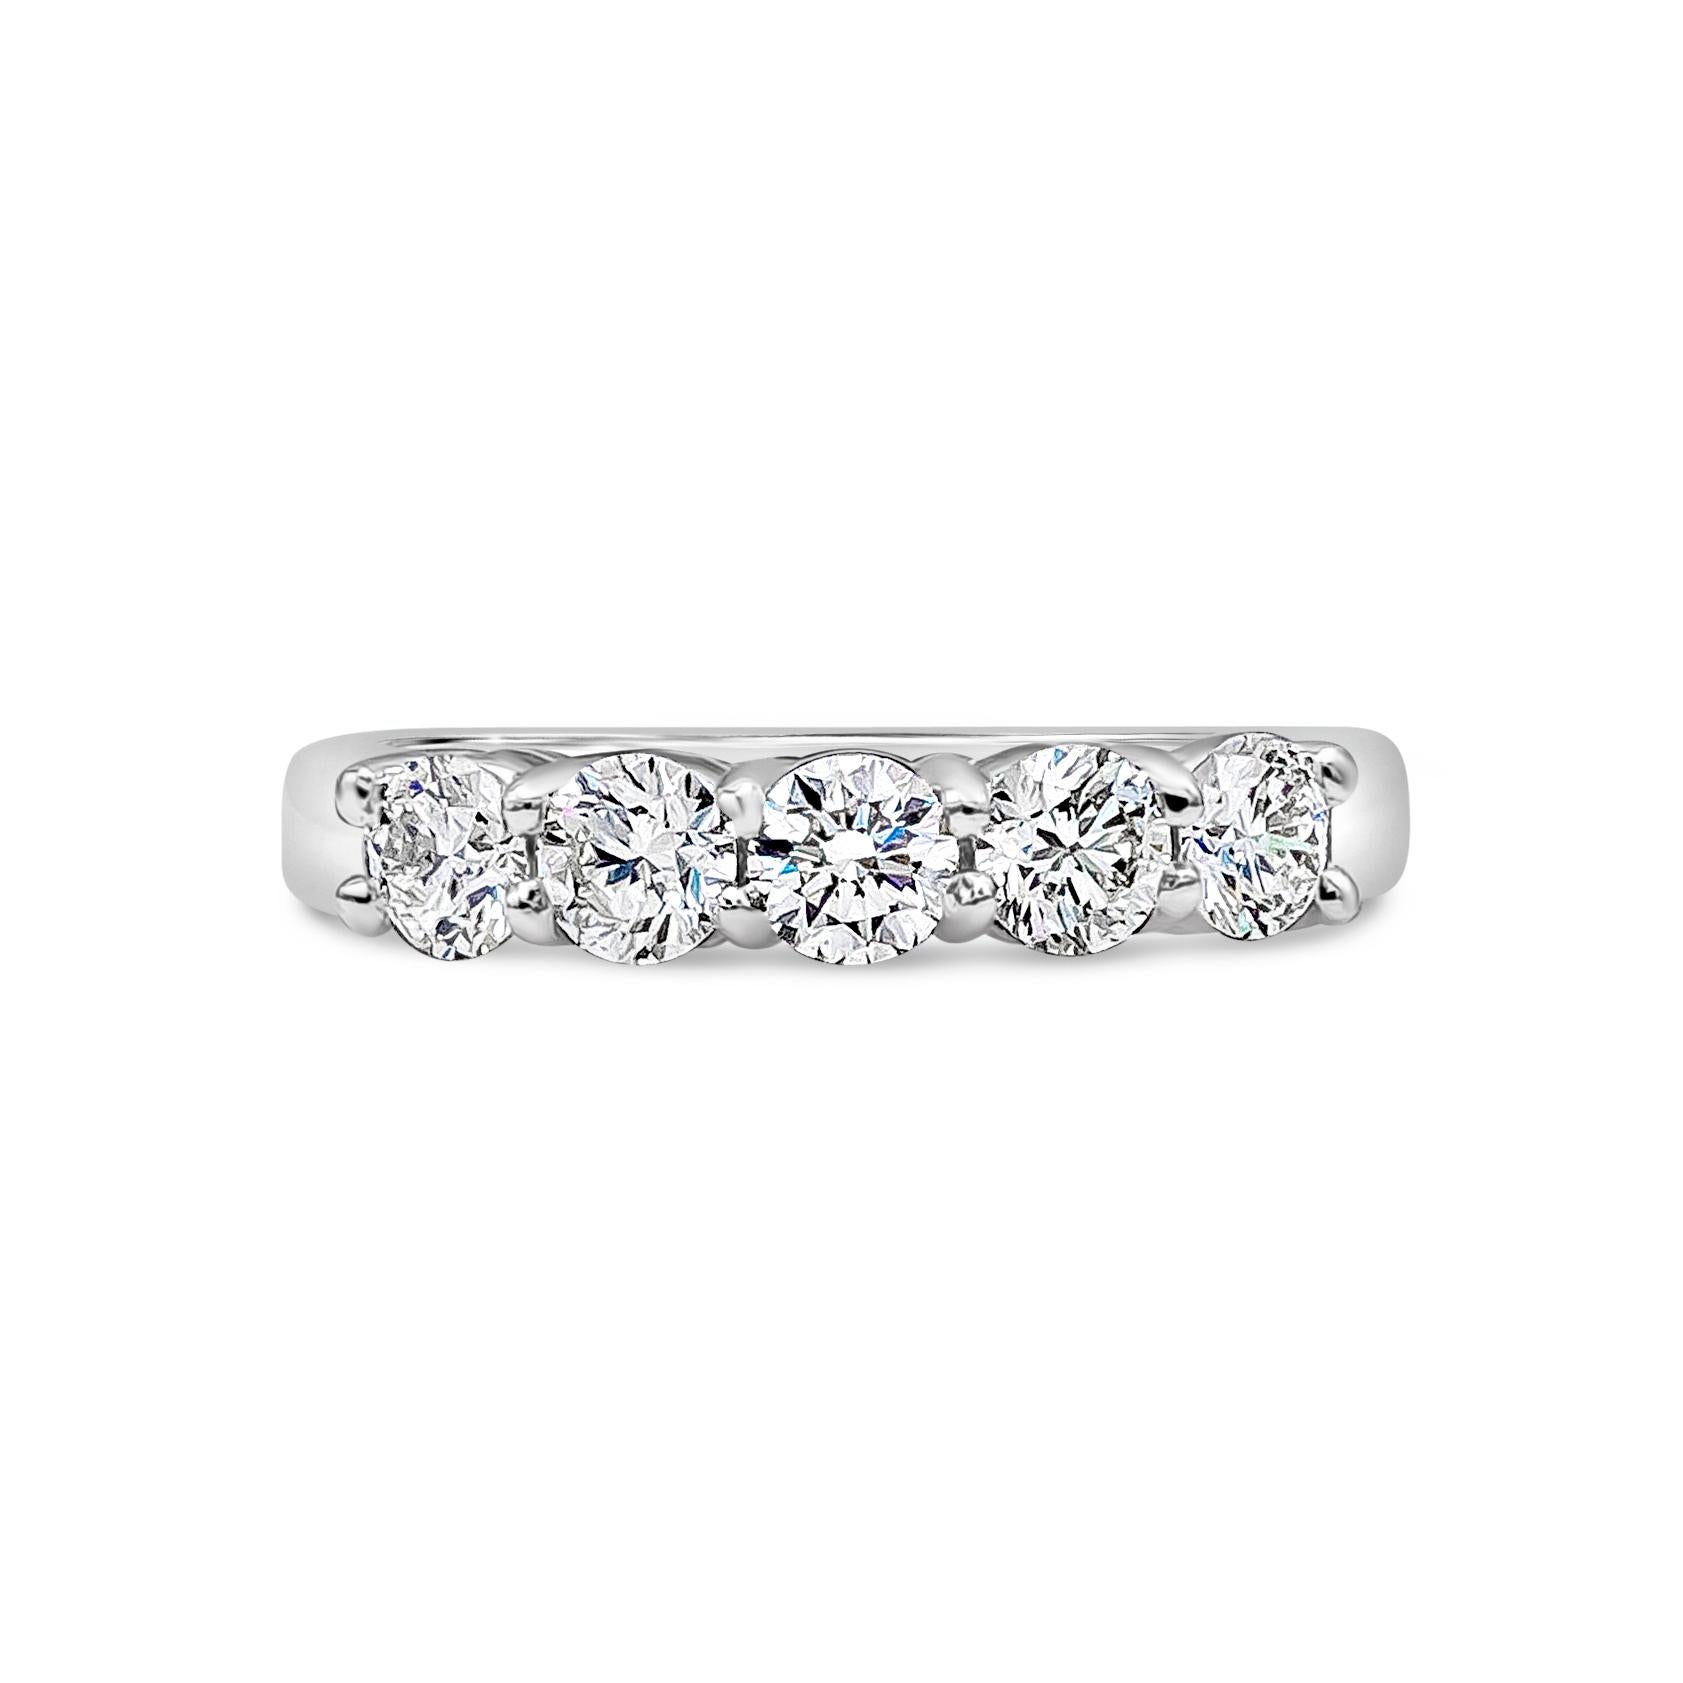 A fashionable and chic style ring showcasing 5 brilliant round diamond weighing 1.00 carat total, I Color and VS in Clarity.  Set in a shared four-prong setting. Made 14K White Gold,  Size 6.25 US

Style available in different price ranges. Prices